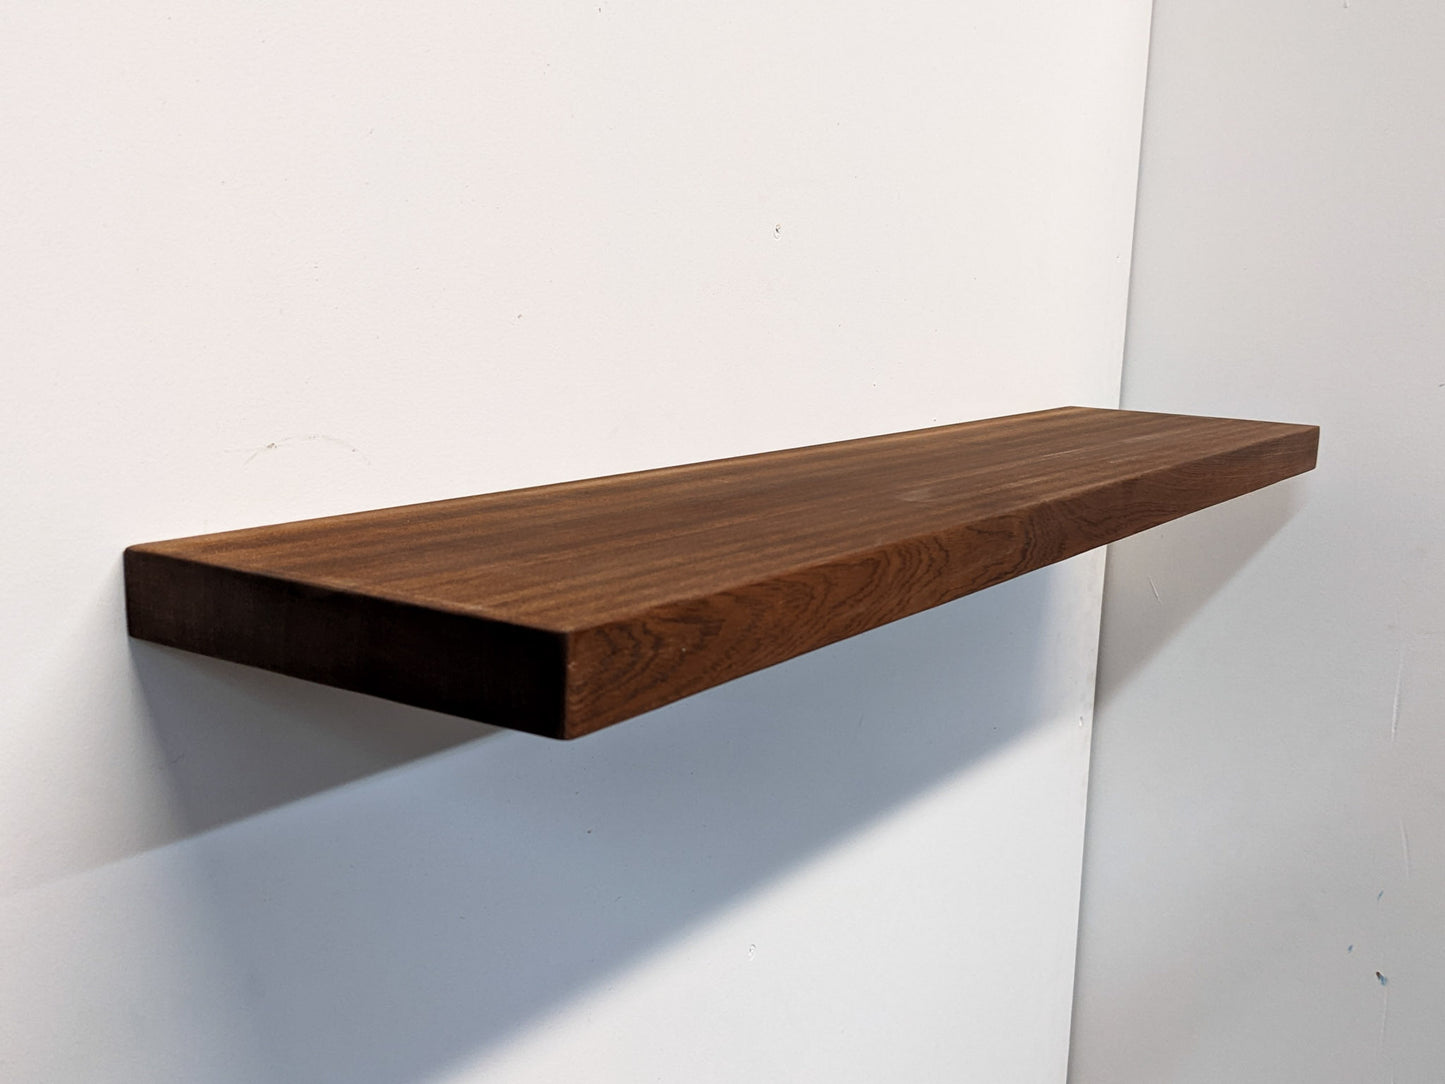 A long floating shelf floats on a wall. The brown mahogany wood displays the natural grain of the heavy duty shelf is highlighted. The shelf casts a shadow on the wall.